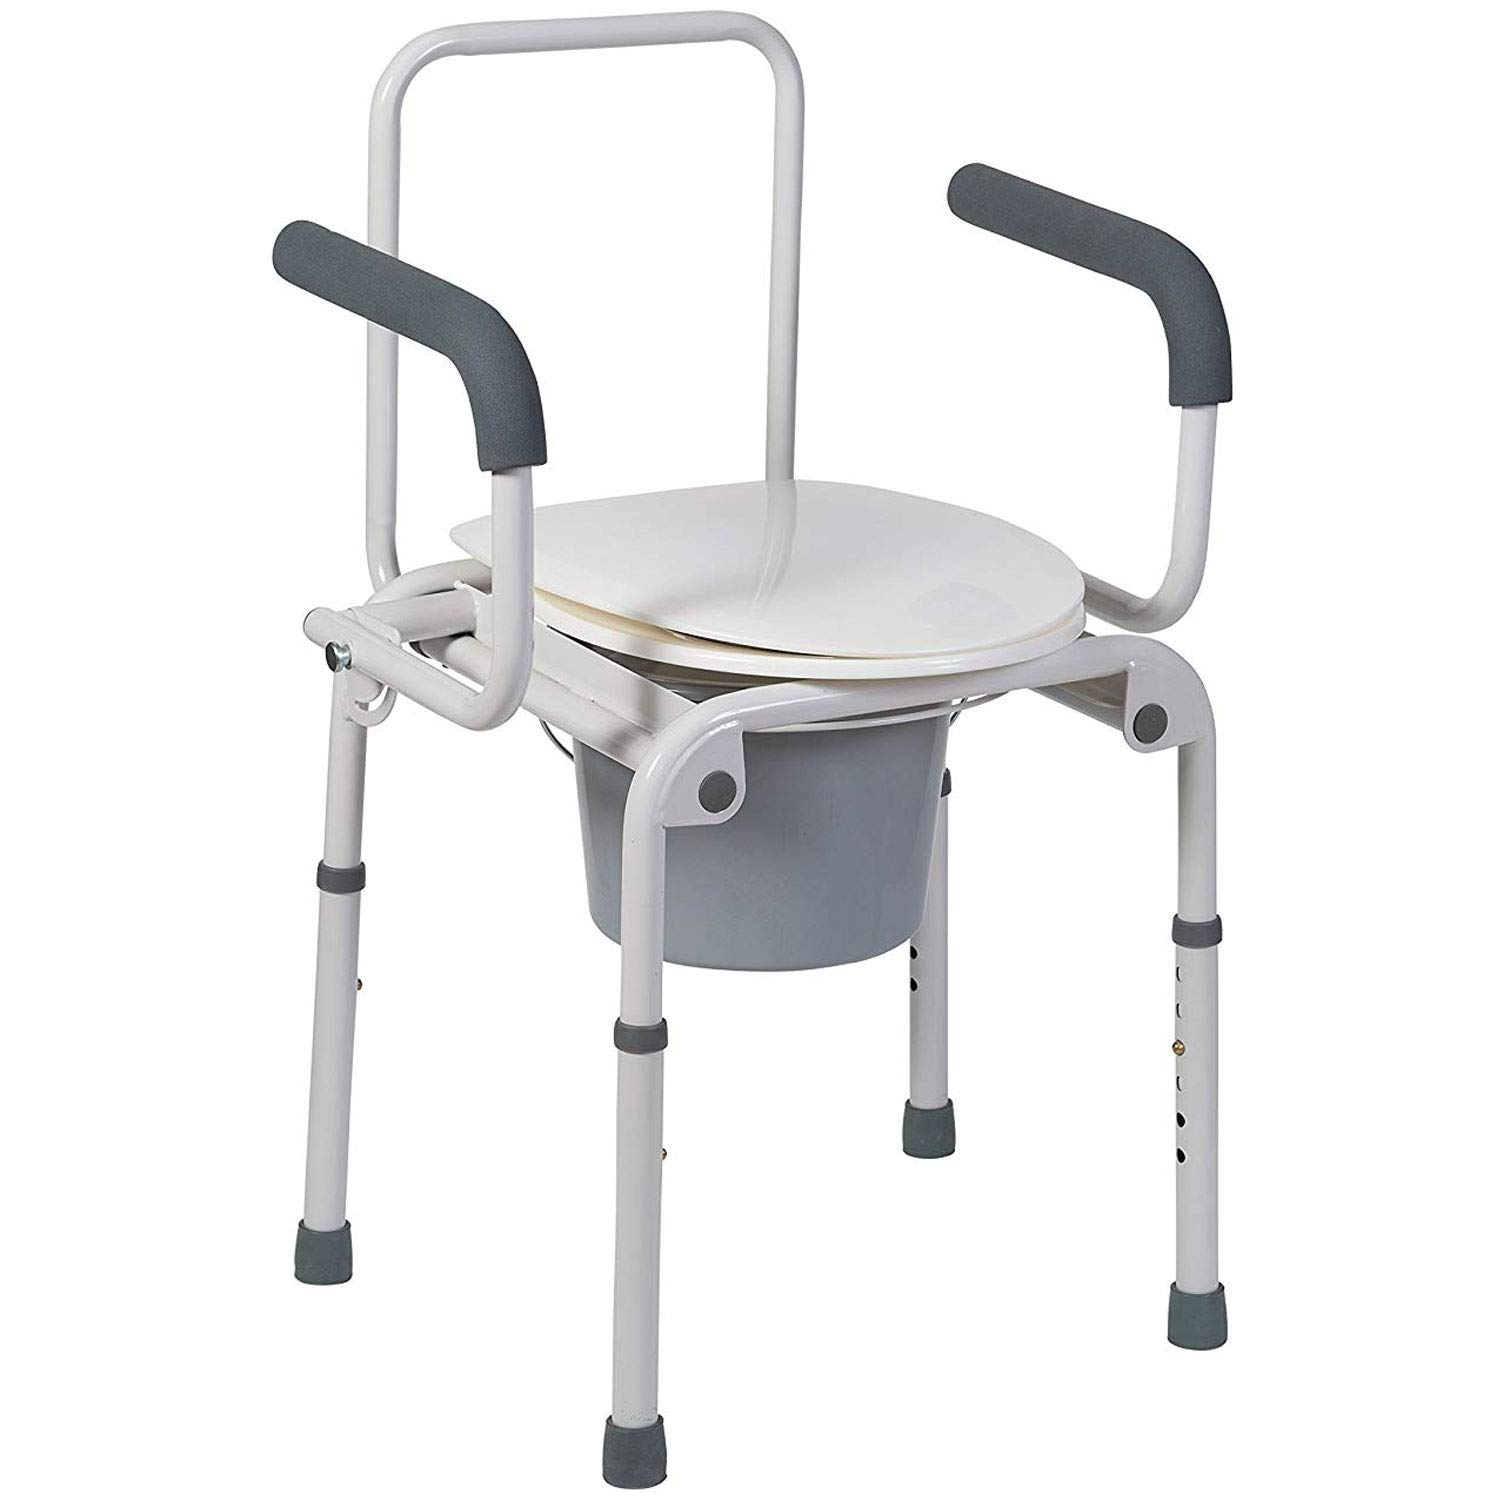 DMI Deluxe Commode for The Elderly, Drop Arm Commode for Easy Transfers, Portable Toilet for Adults, Steel Portable Toilet or Porta Potty, Easy No Tool Assembly, White